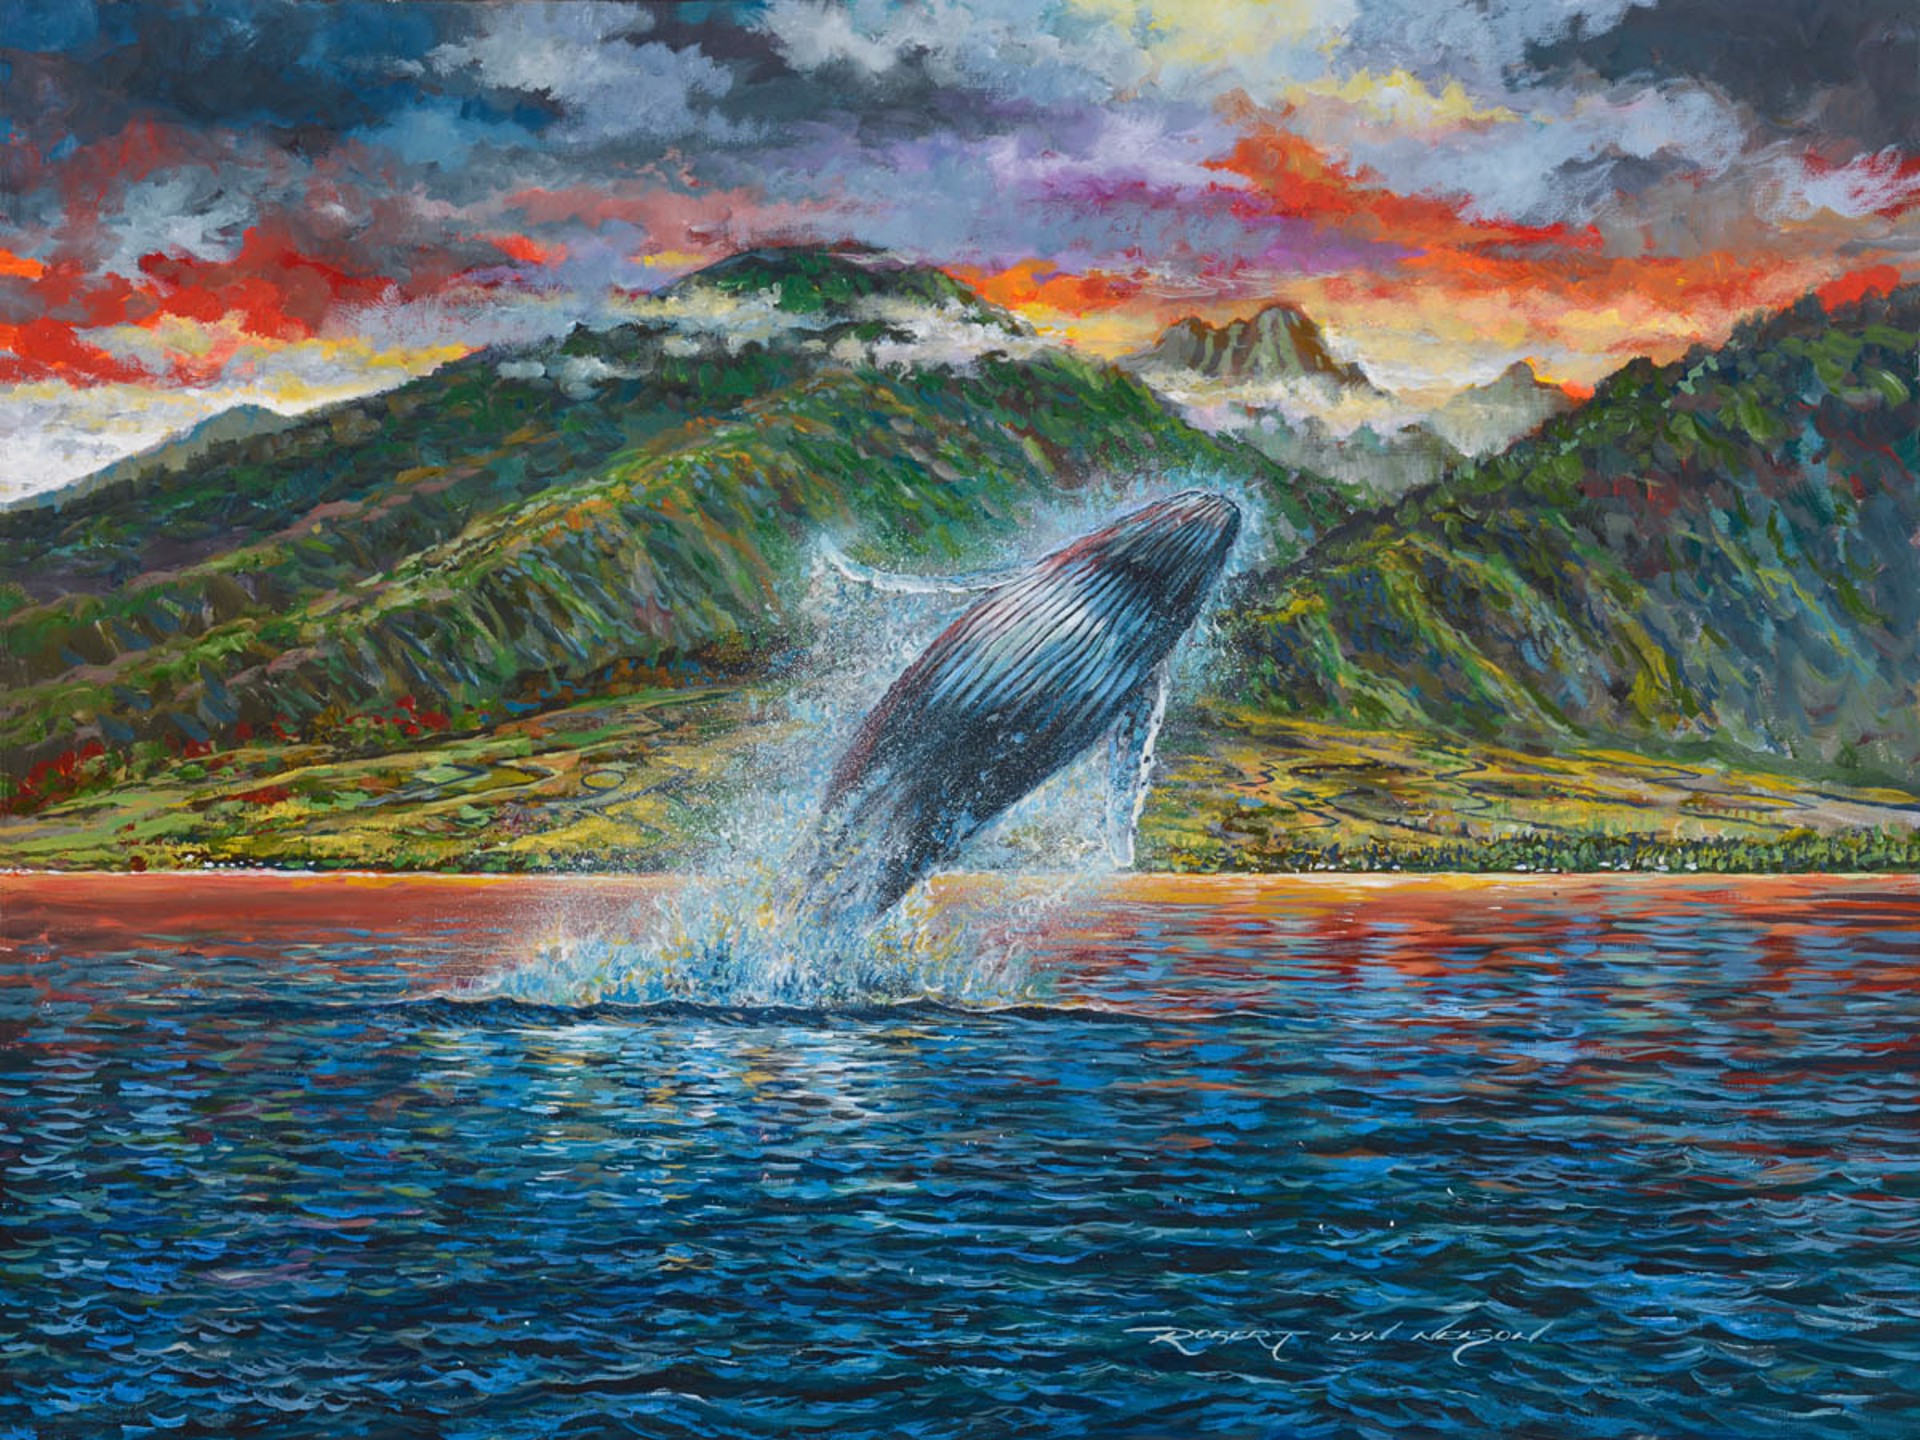 Magnificence - Humpback Breaching by Robert Lyn Nelson